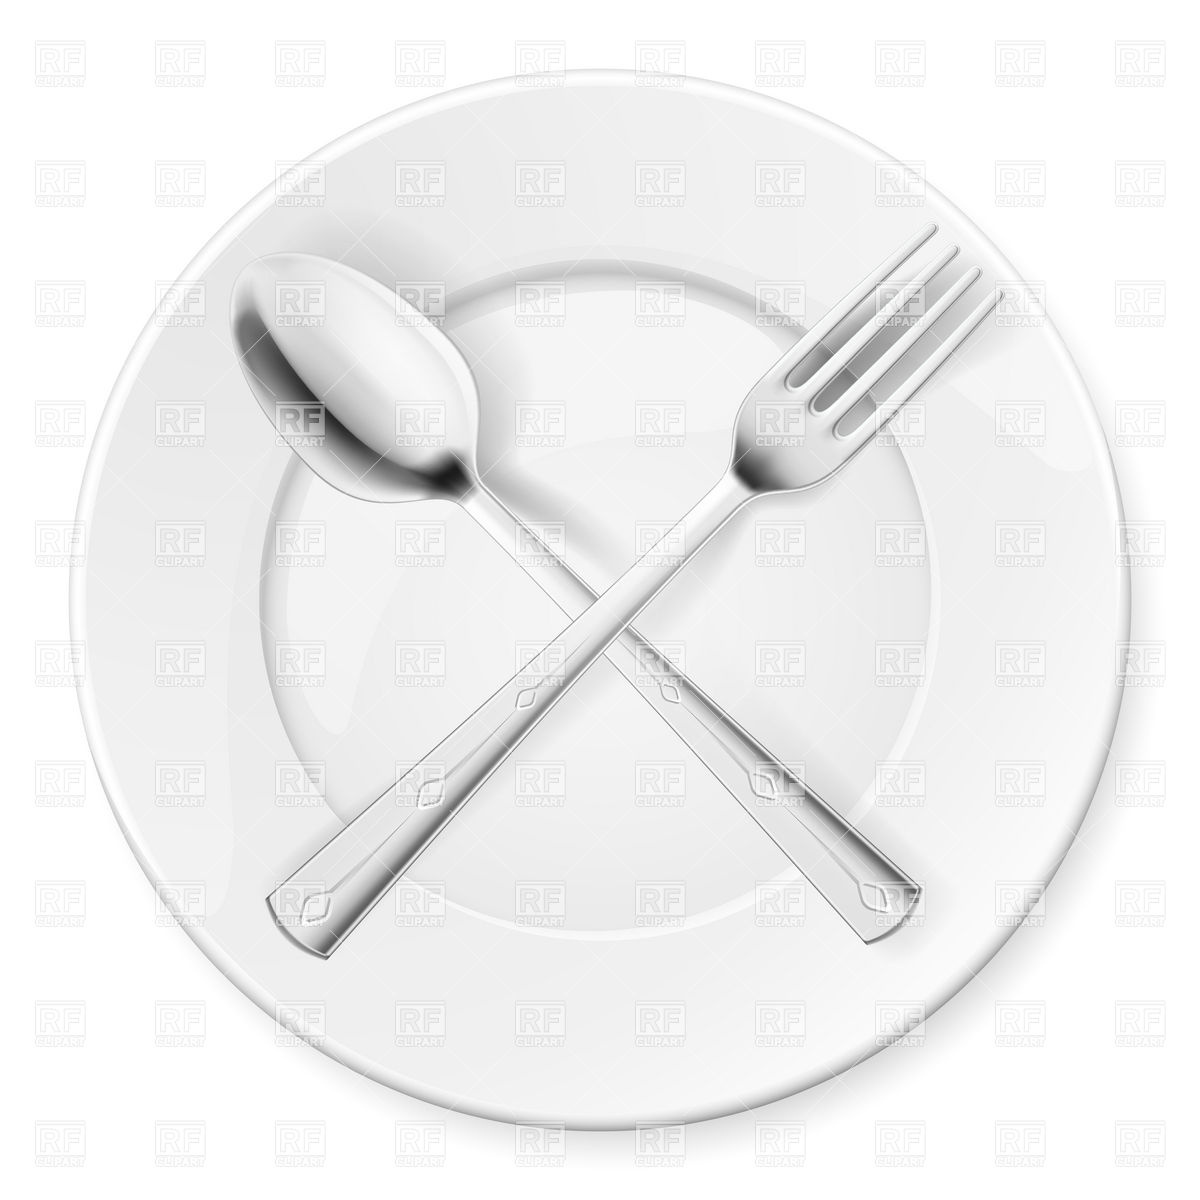 Crossed Fork And Knife On Plate Download Royalty Free Vector Clipart